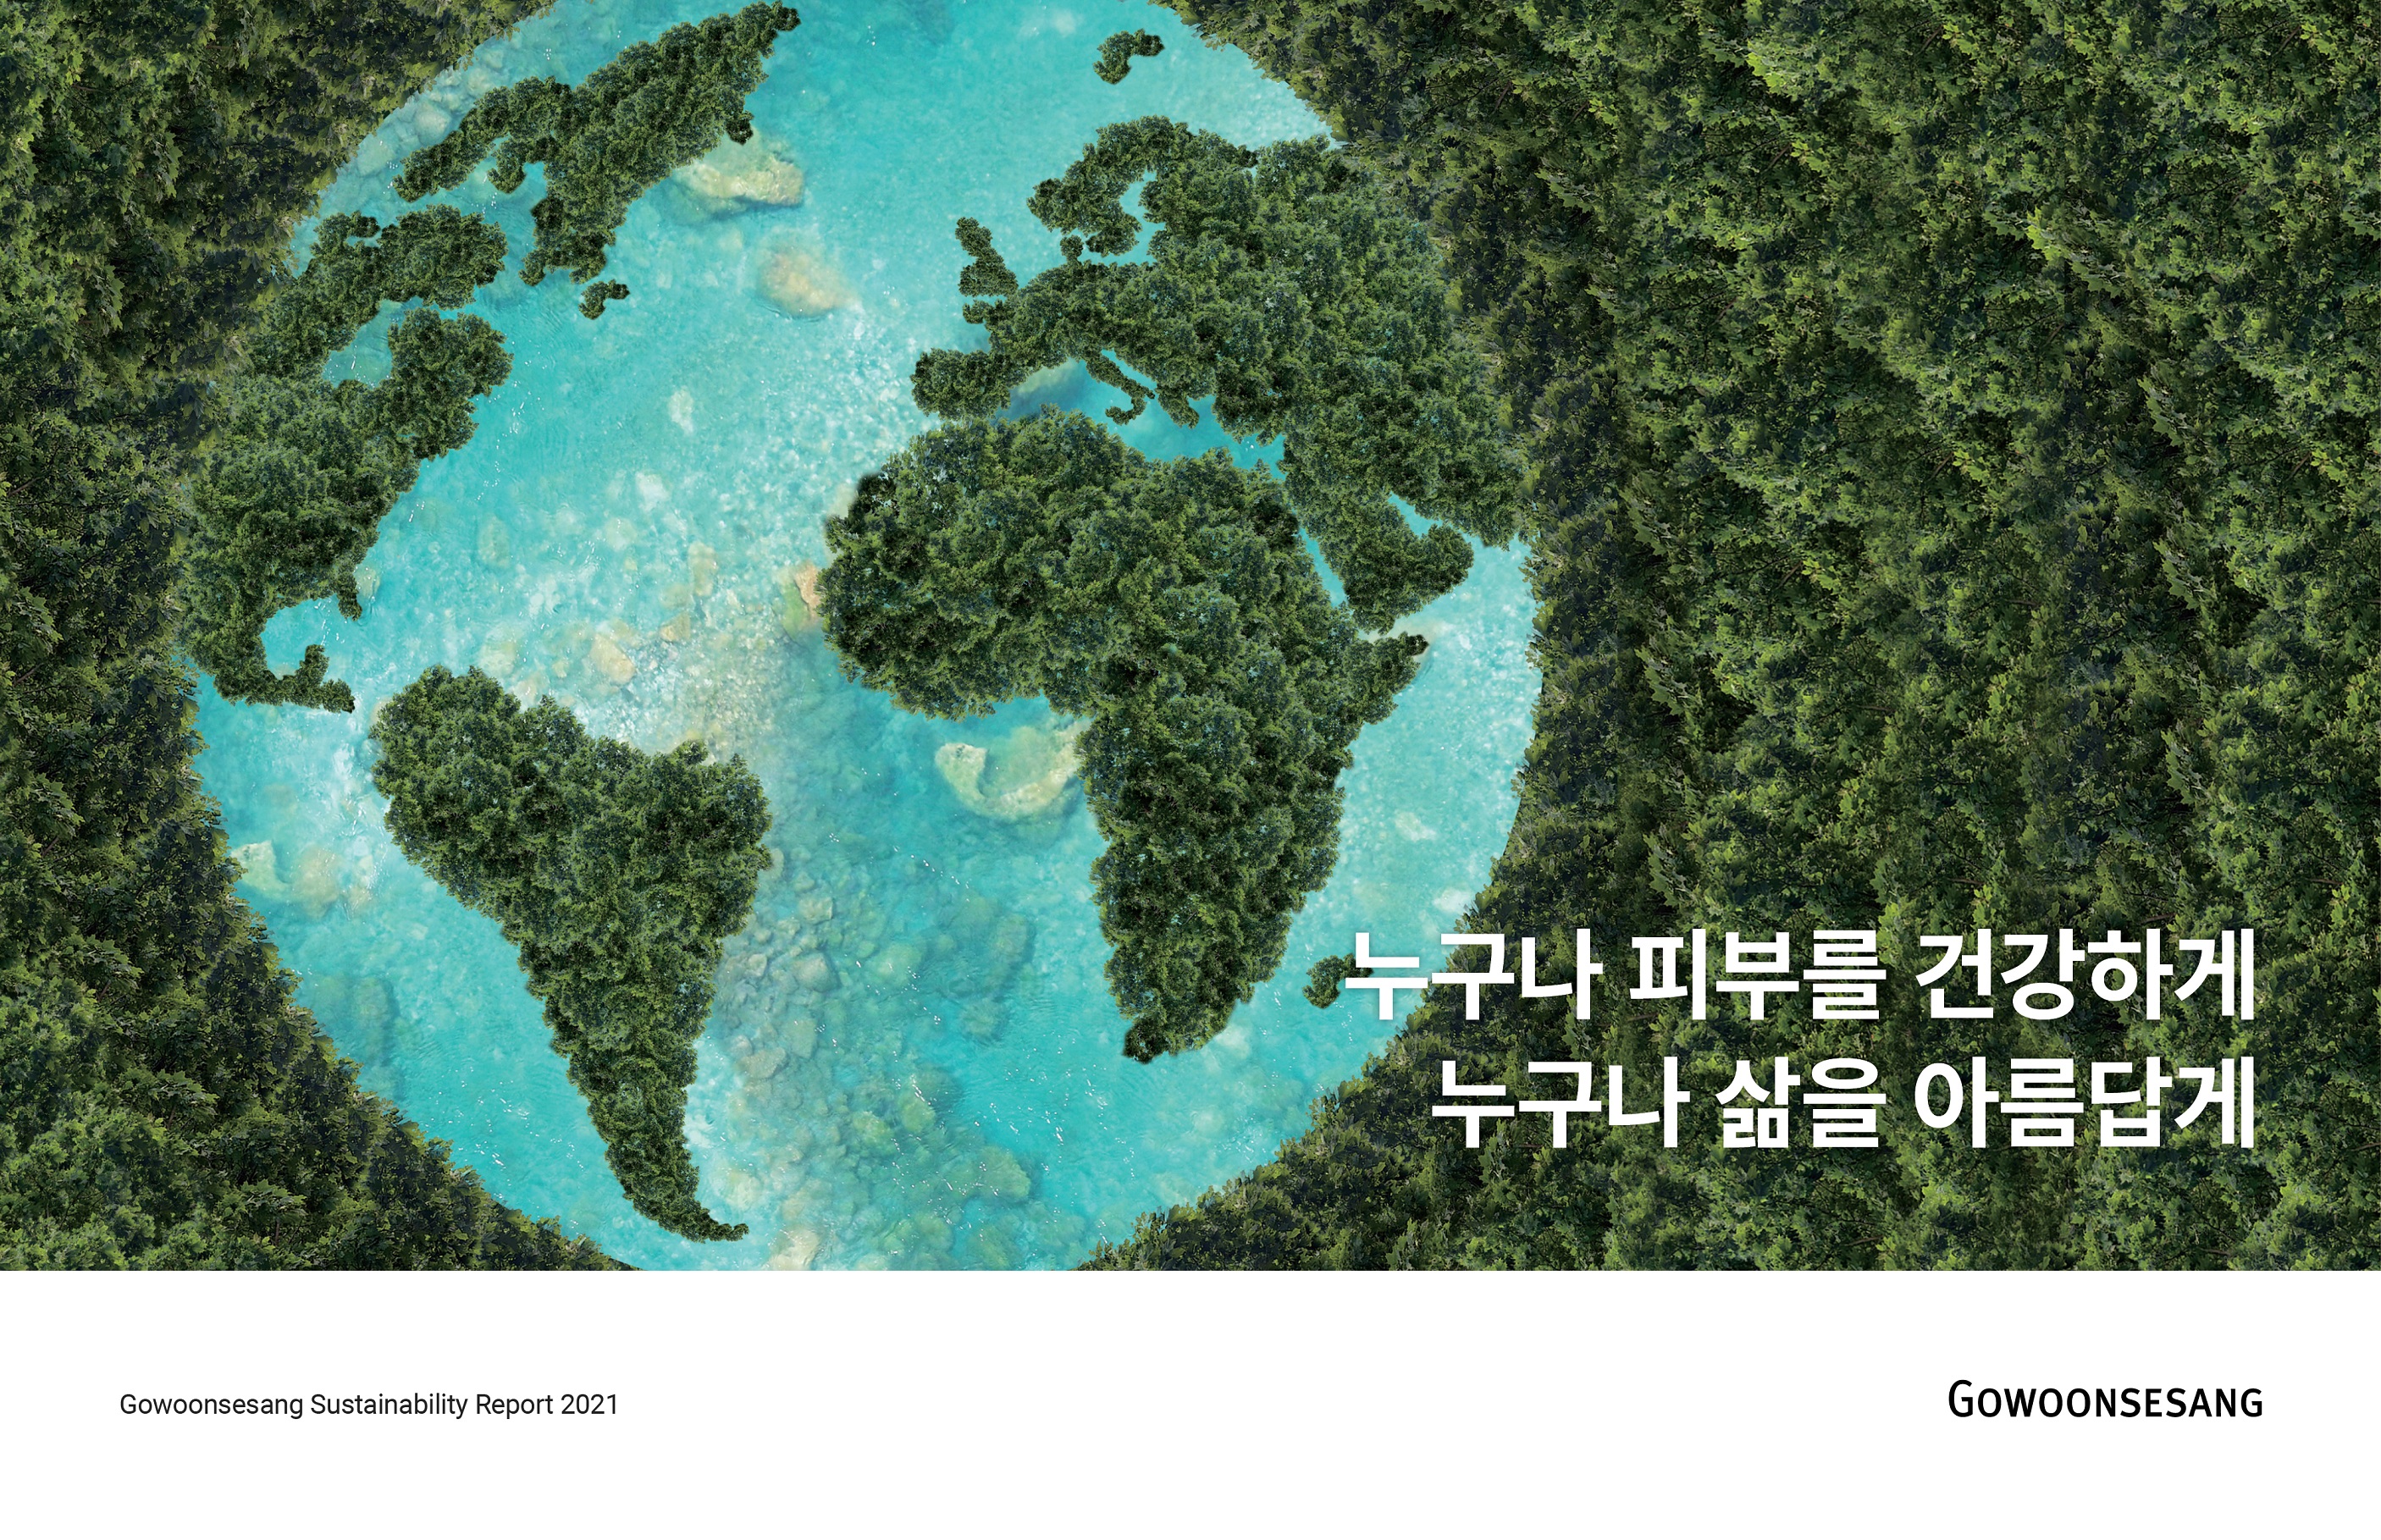 221011_Gowoonsesang Sustainability Report cover.jpg